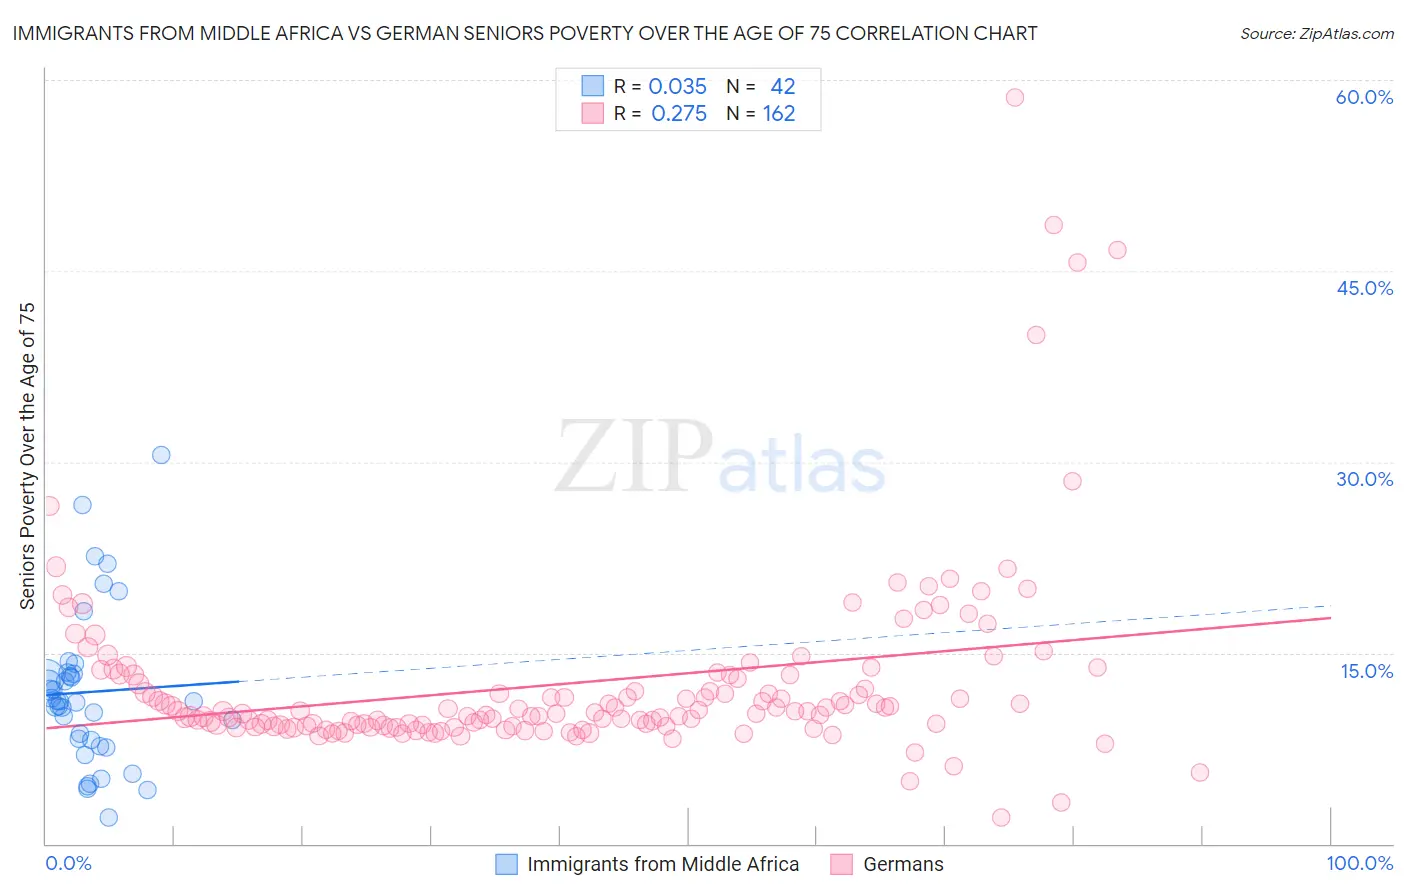 Immigrants from Middle Africa vs German Seniors Poverty Over the Age of 75